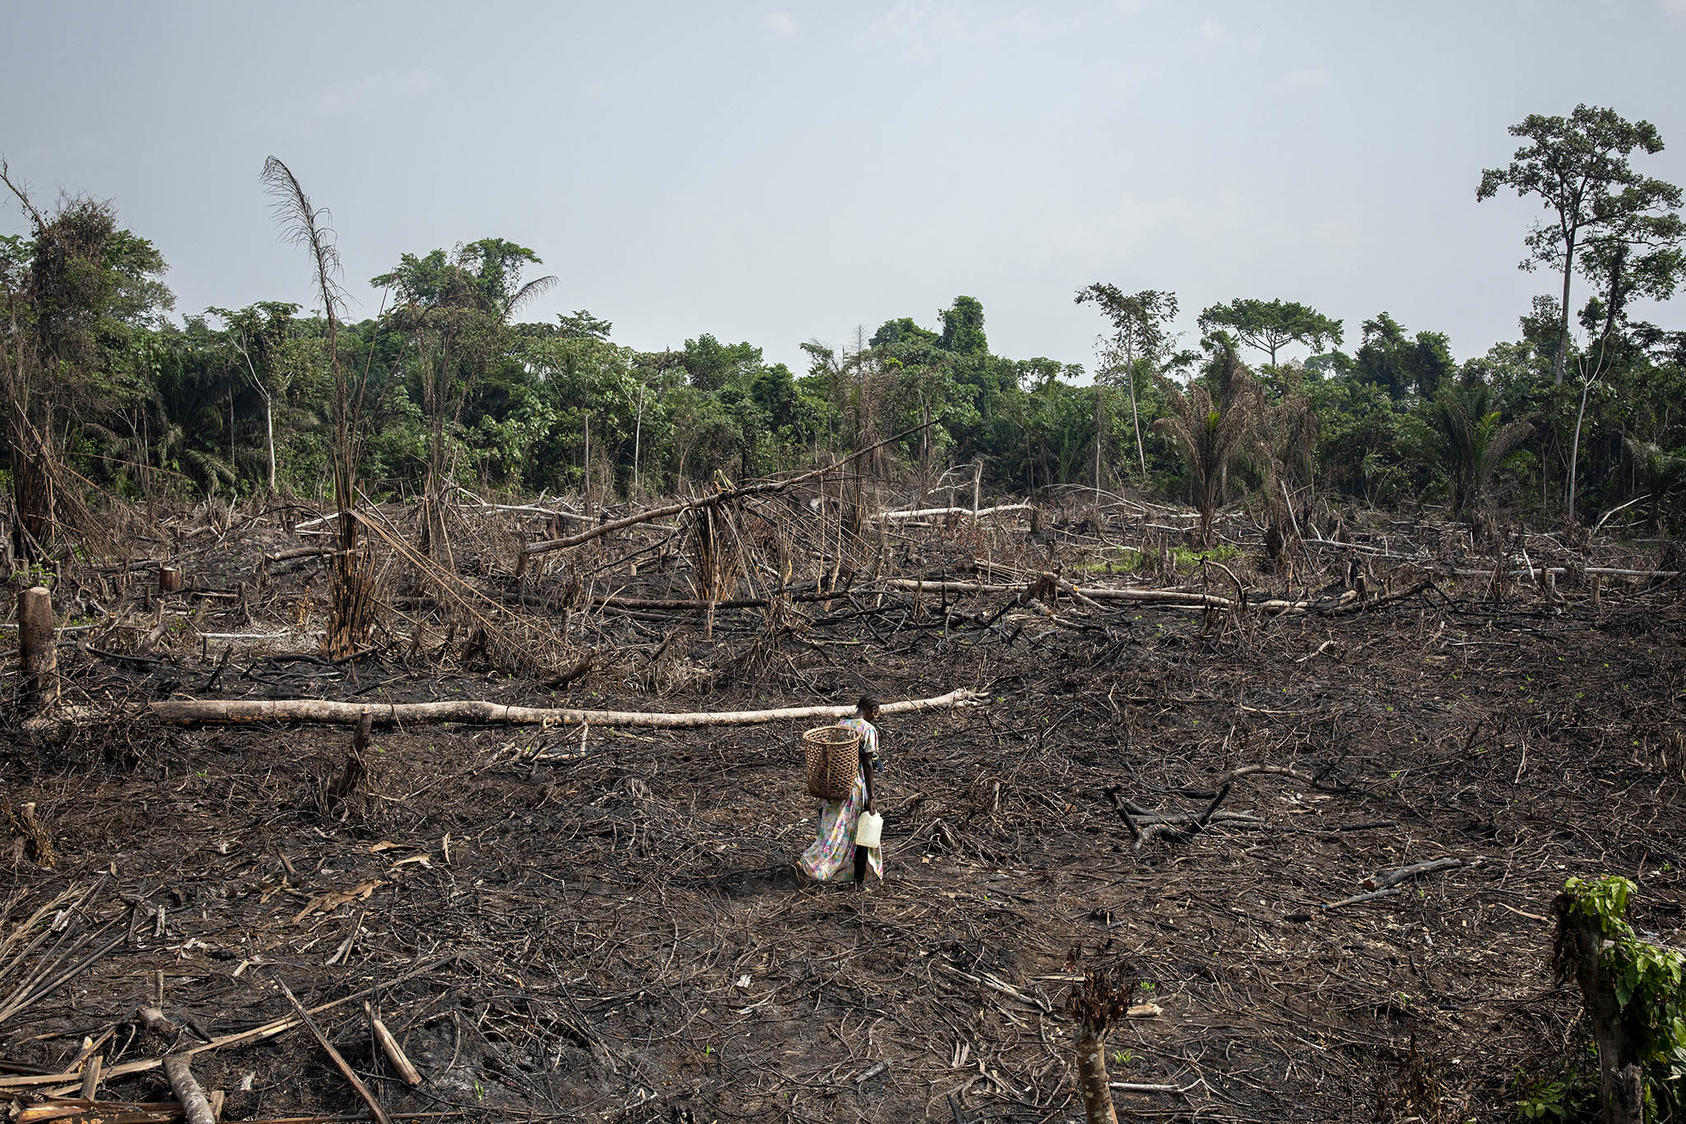 A man collects scrap wood from property that had been burned to clear for farmland, in Mbandaka, Democratic Republic of Congo. March 15, 2022. (Ashley Gilbertson/The New York Times)